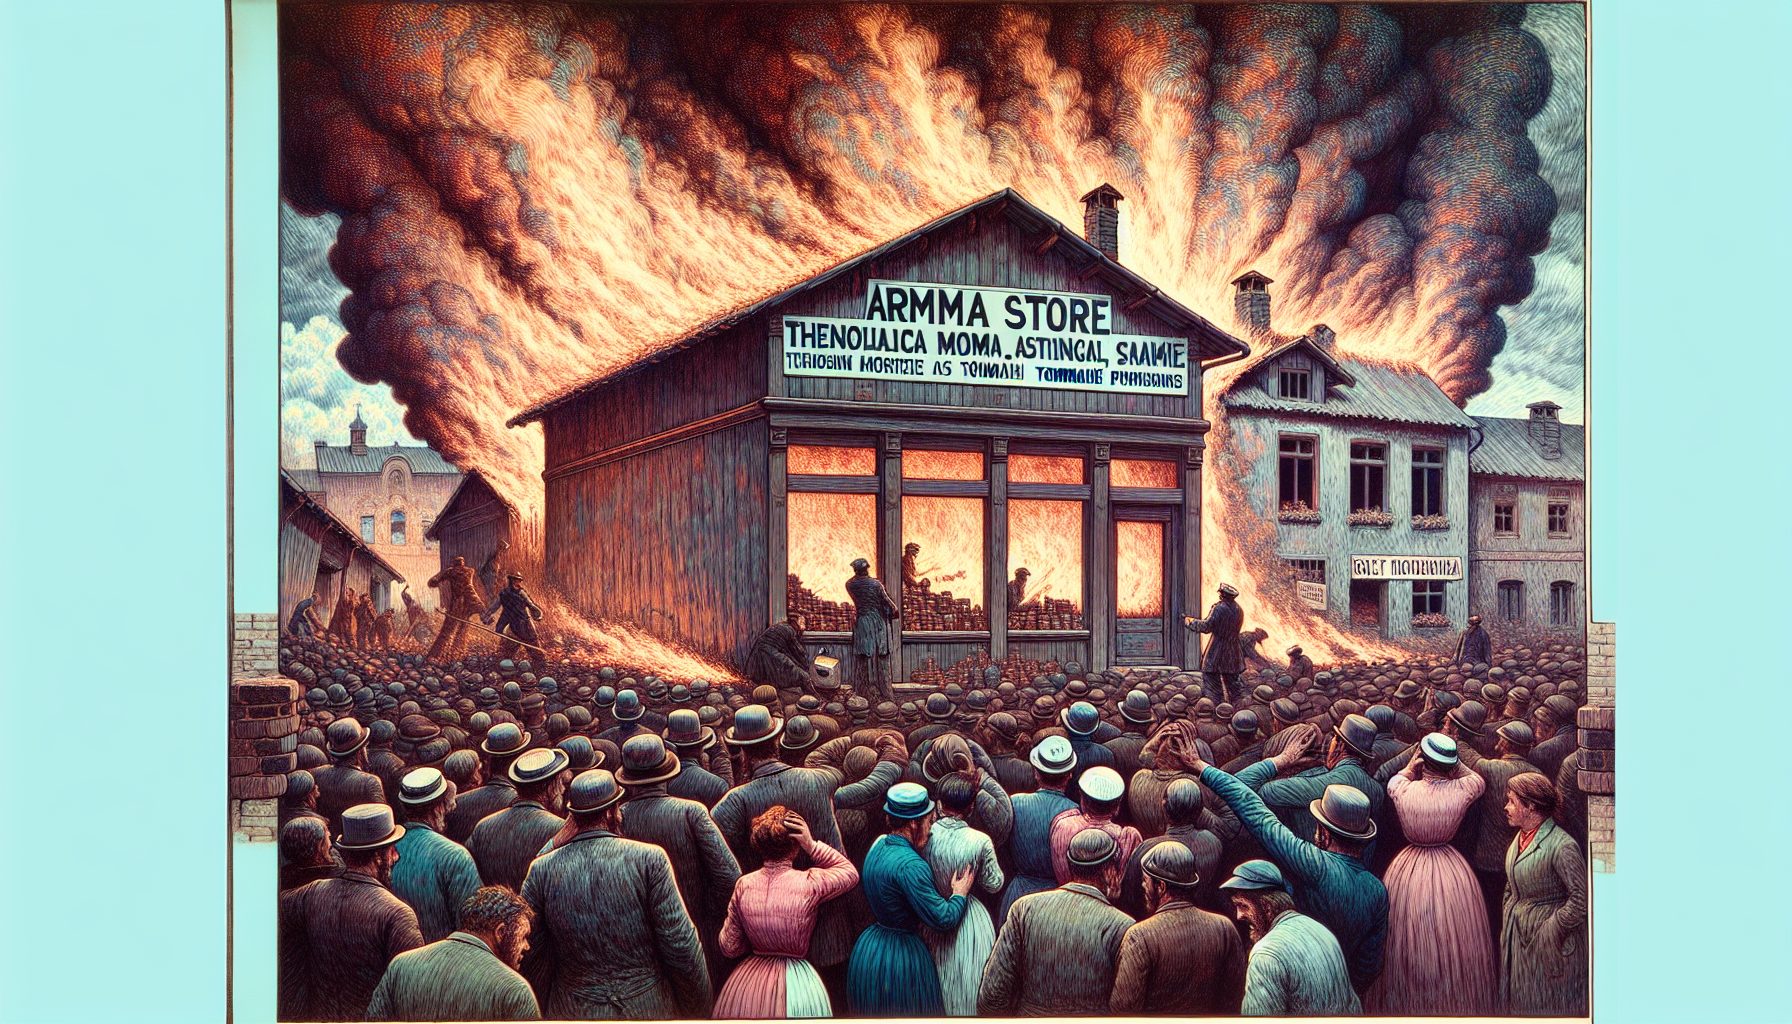 "Aroma Store Fire"